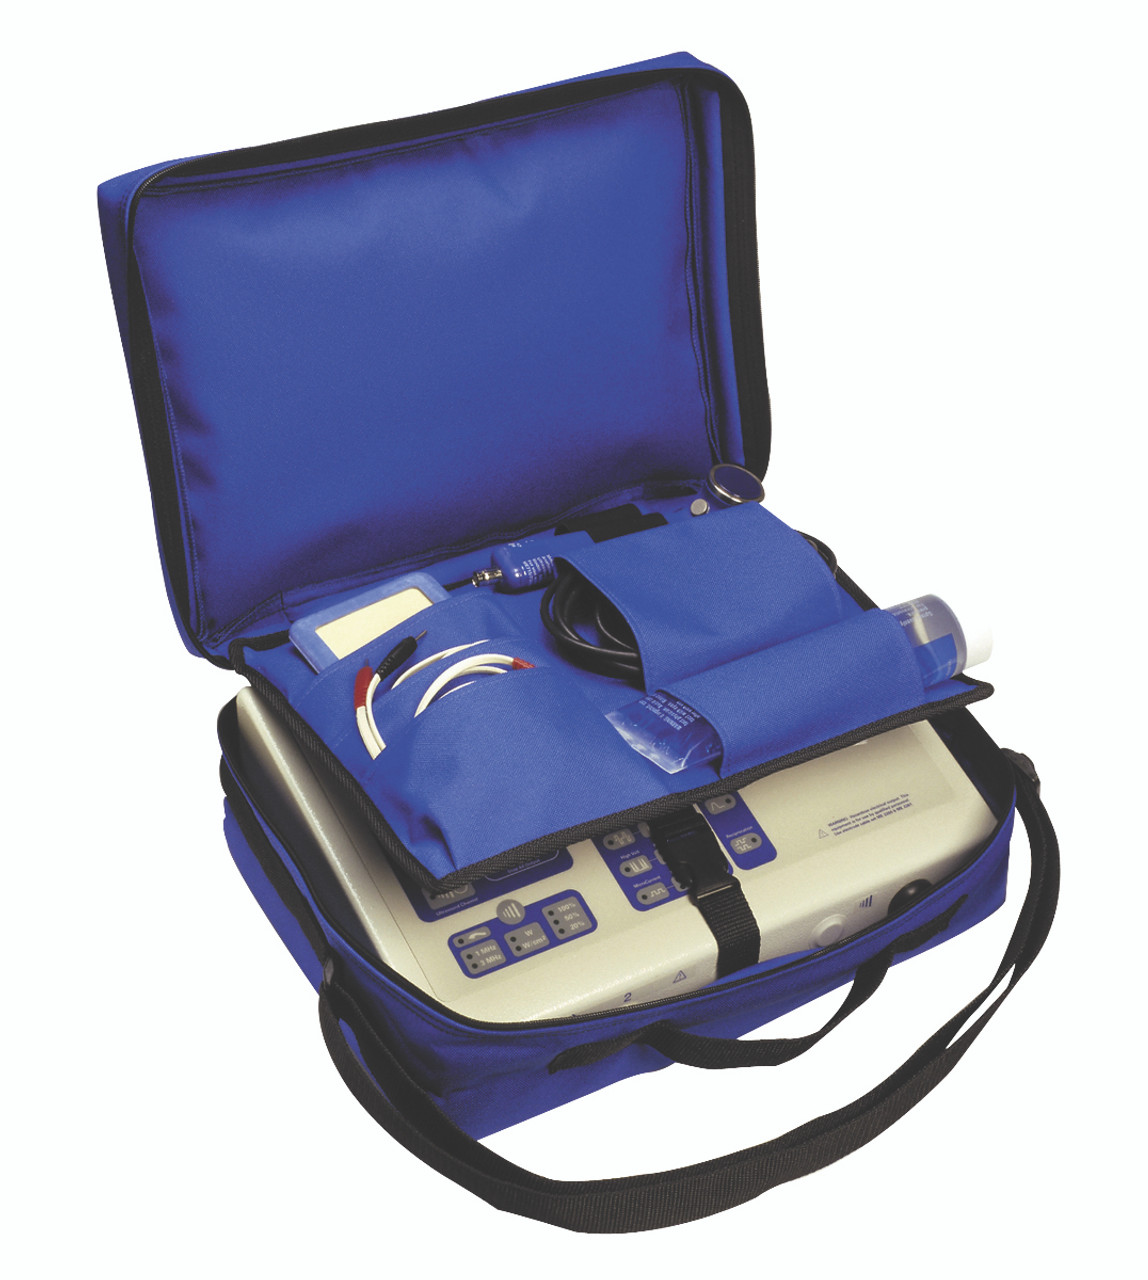 Mettler¨ padded tote for Sonicator Plus 992, 994 or Syst*Stim 294 and accessories